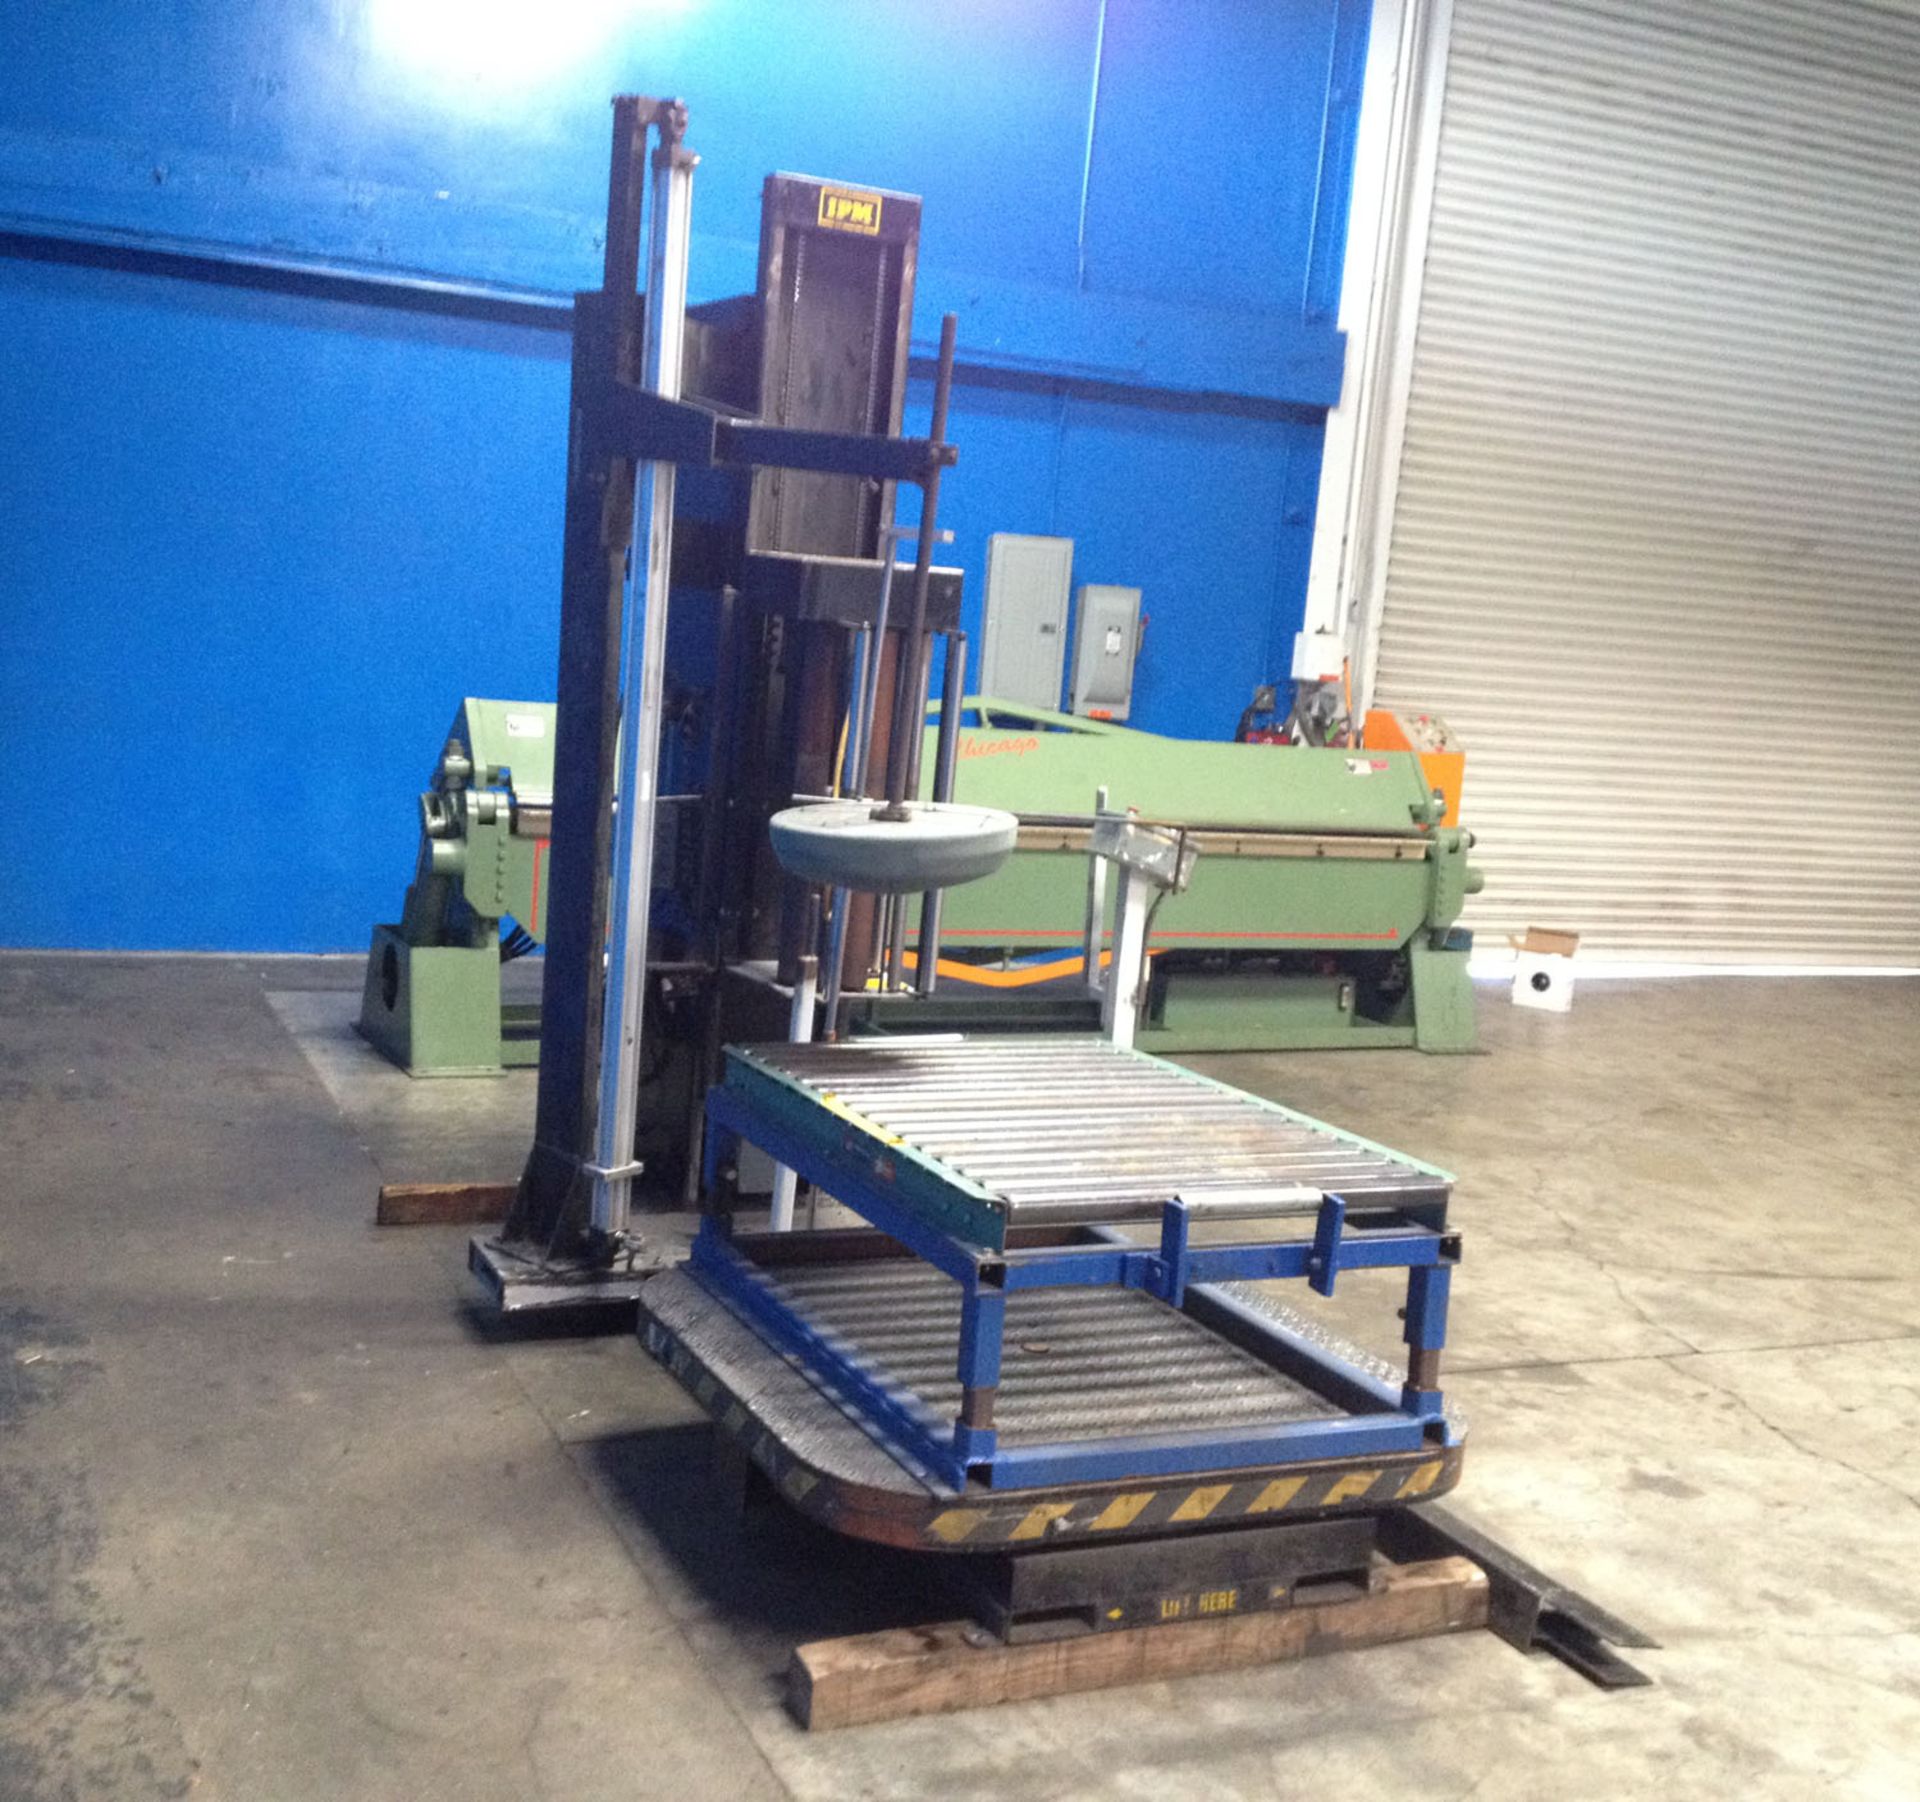 IPM Rotary Table Stretch Wrapping Machine, 48" x 48", Mdl: 55 Series, Located In: Huntington Park, - Image 3 of 11